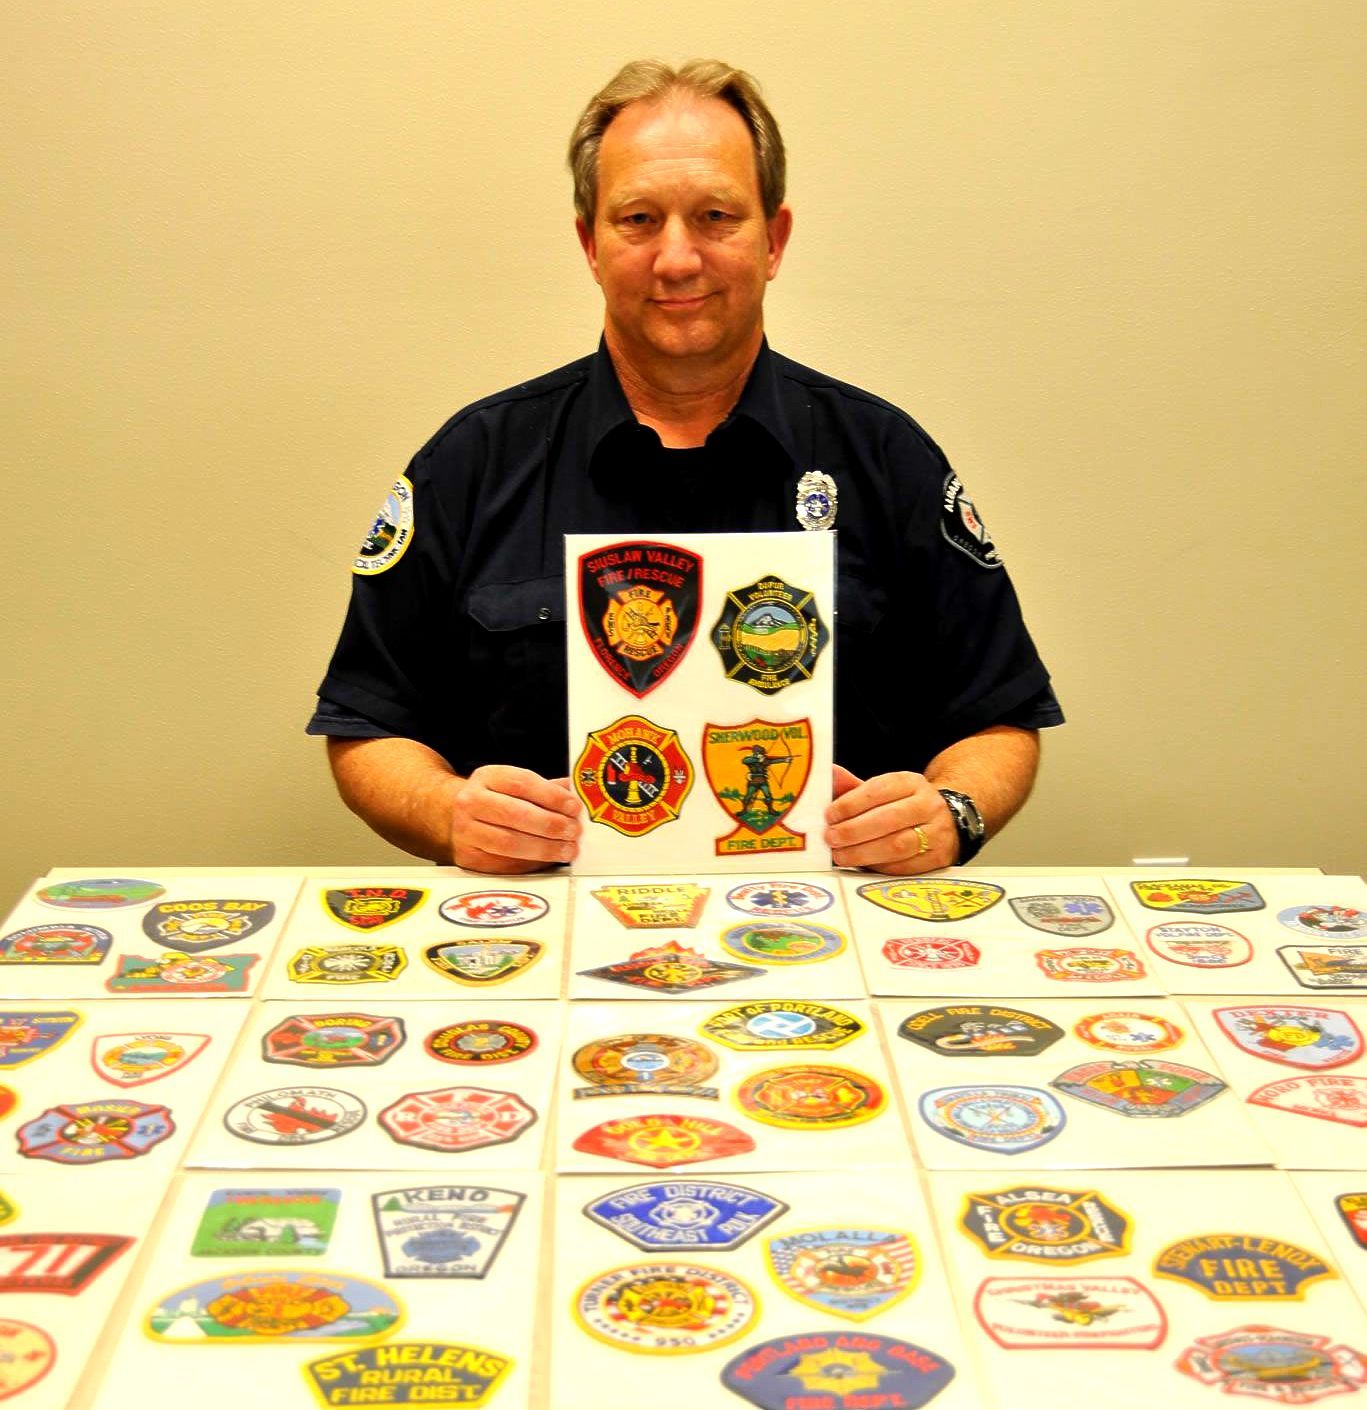  Largest collection of fire patches: Bob Brooks sets world record (Video)